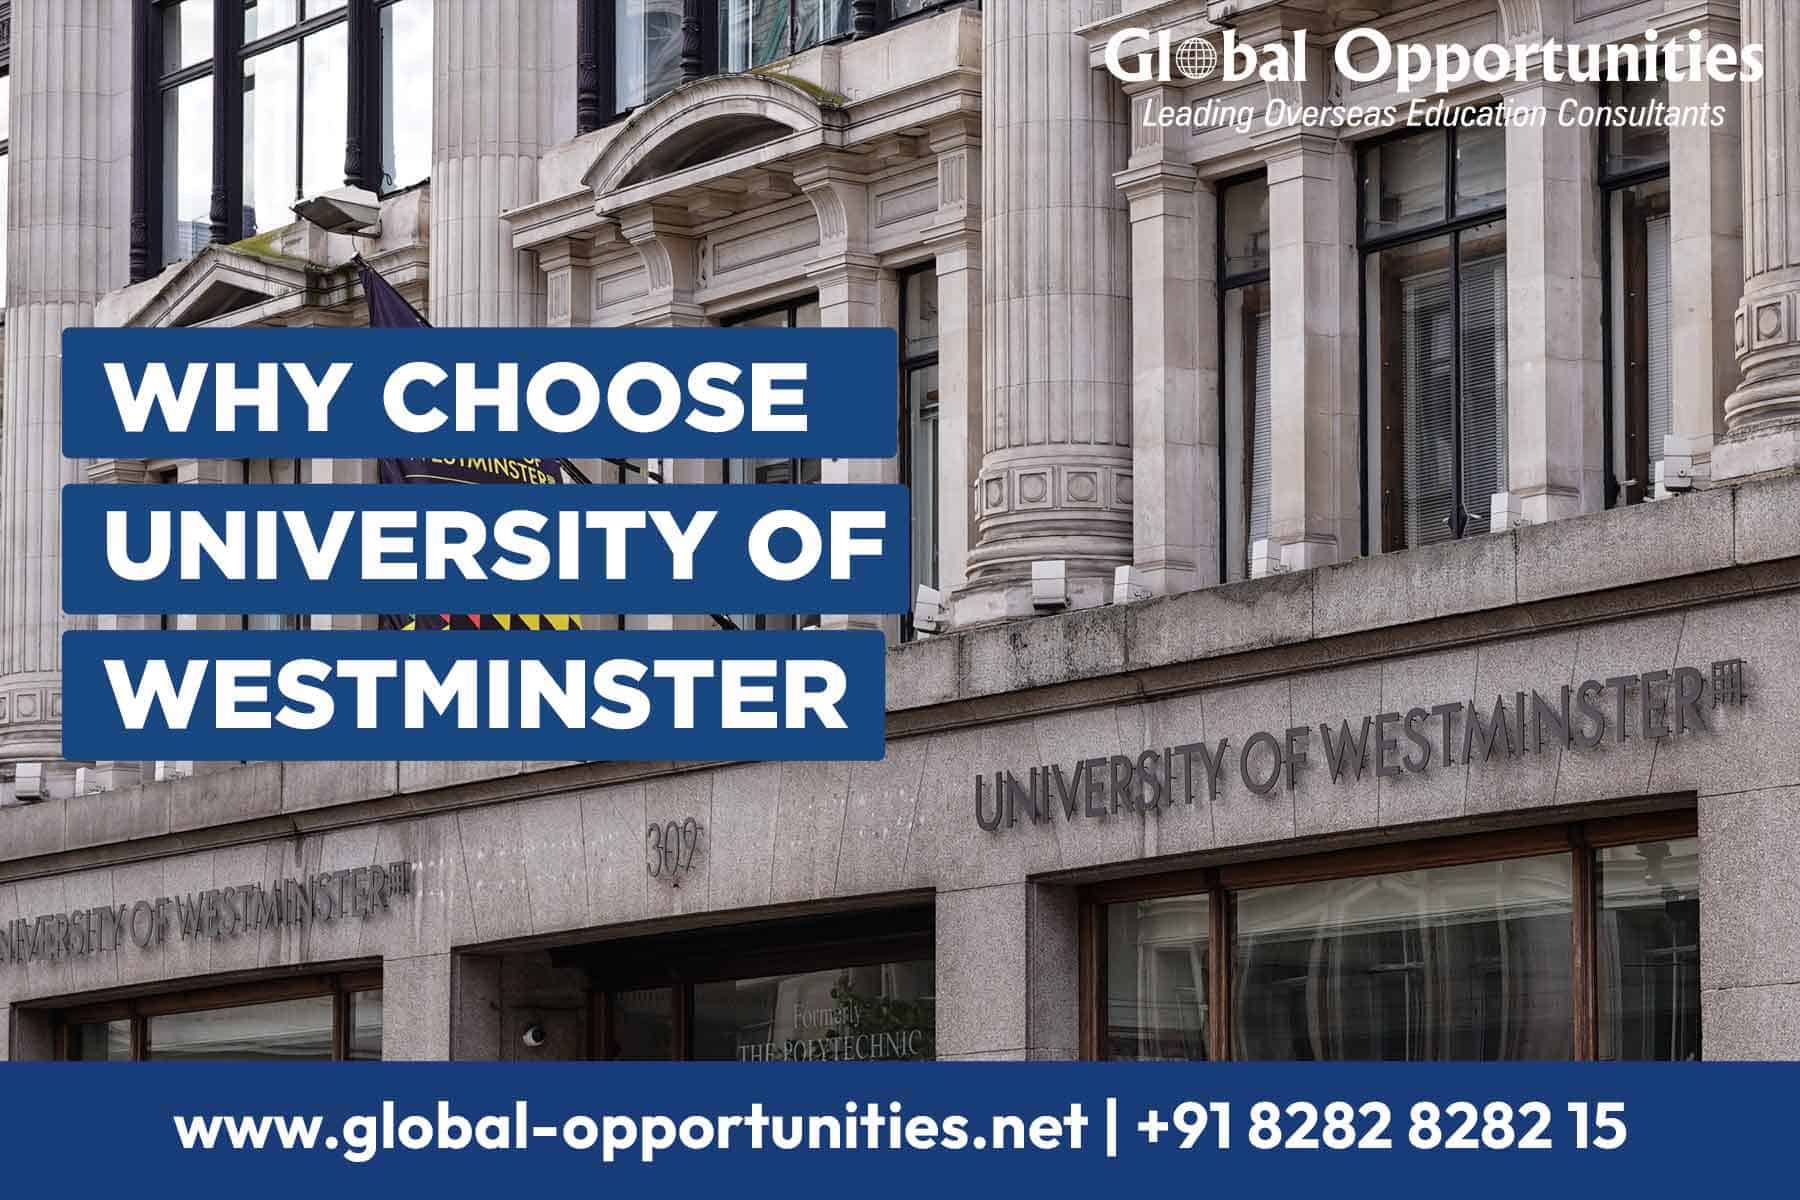 Why Choose University of Westminster?